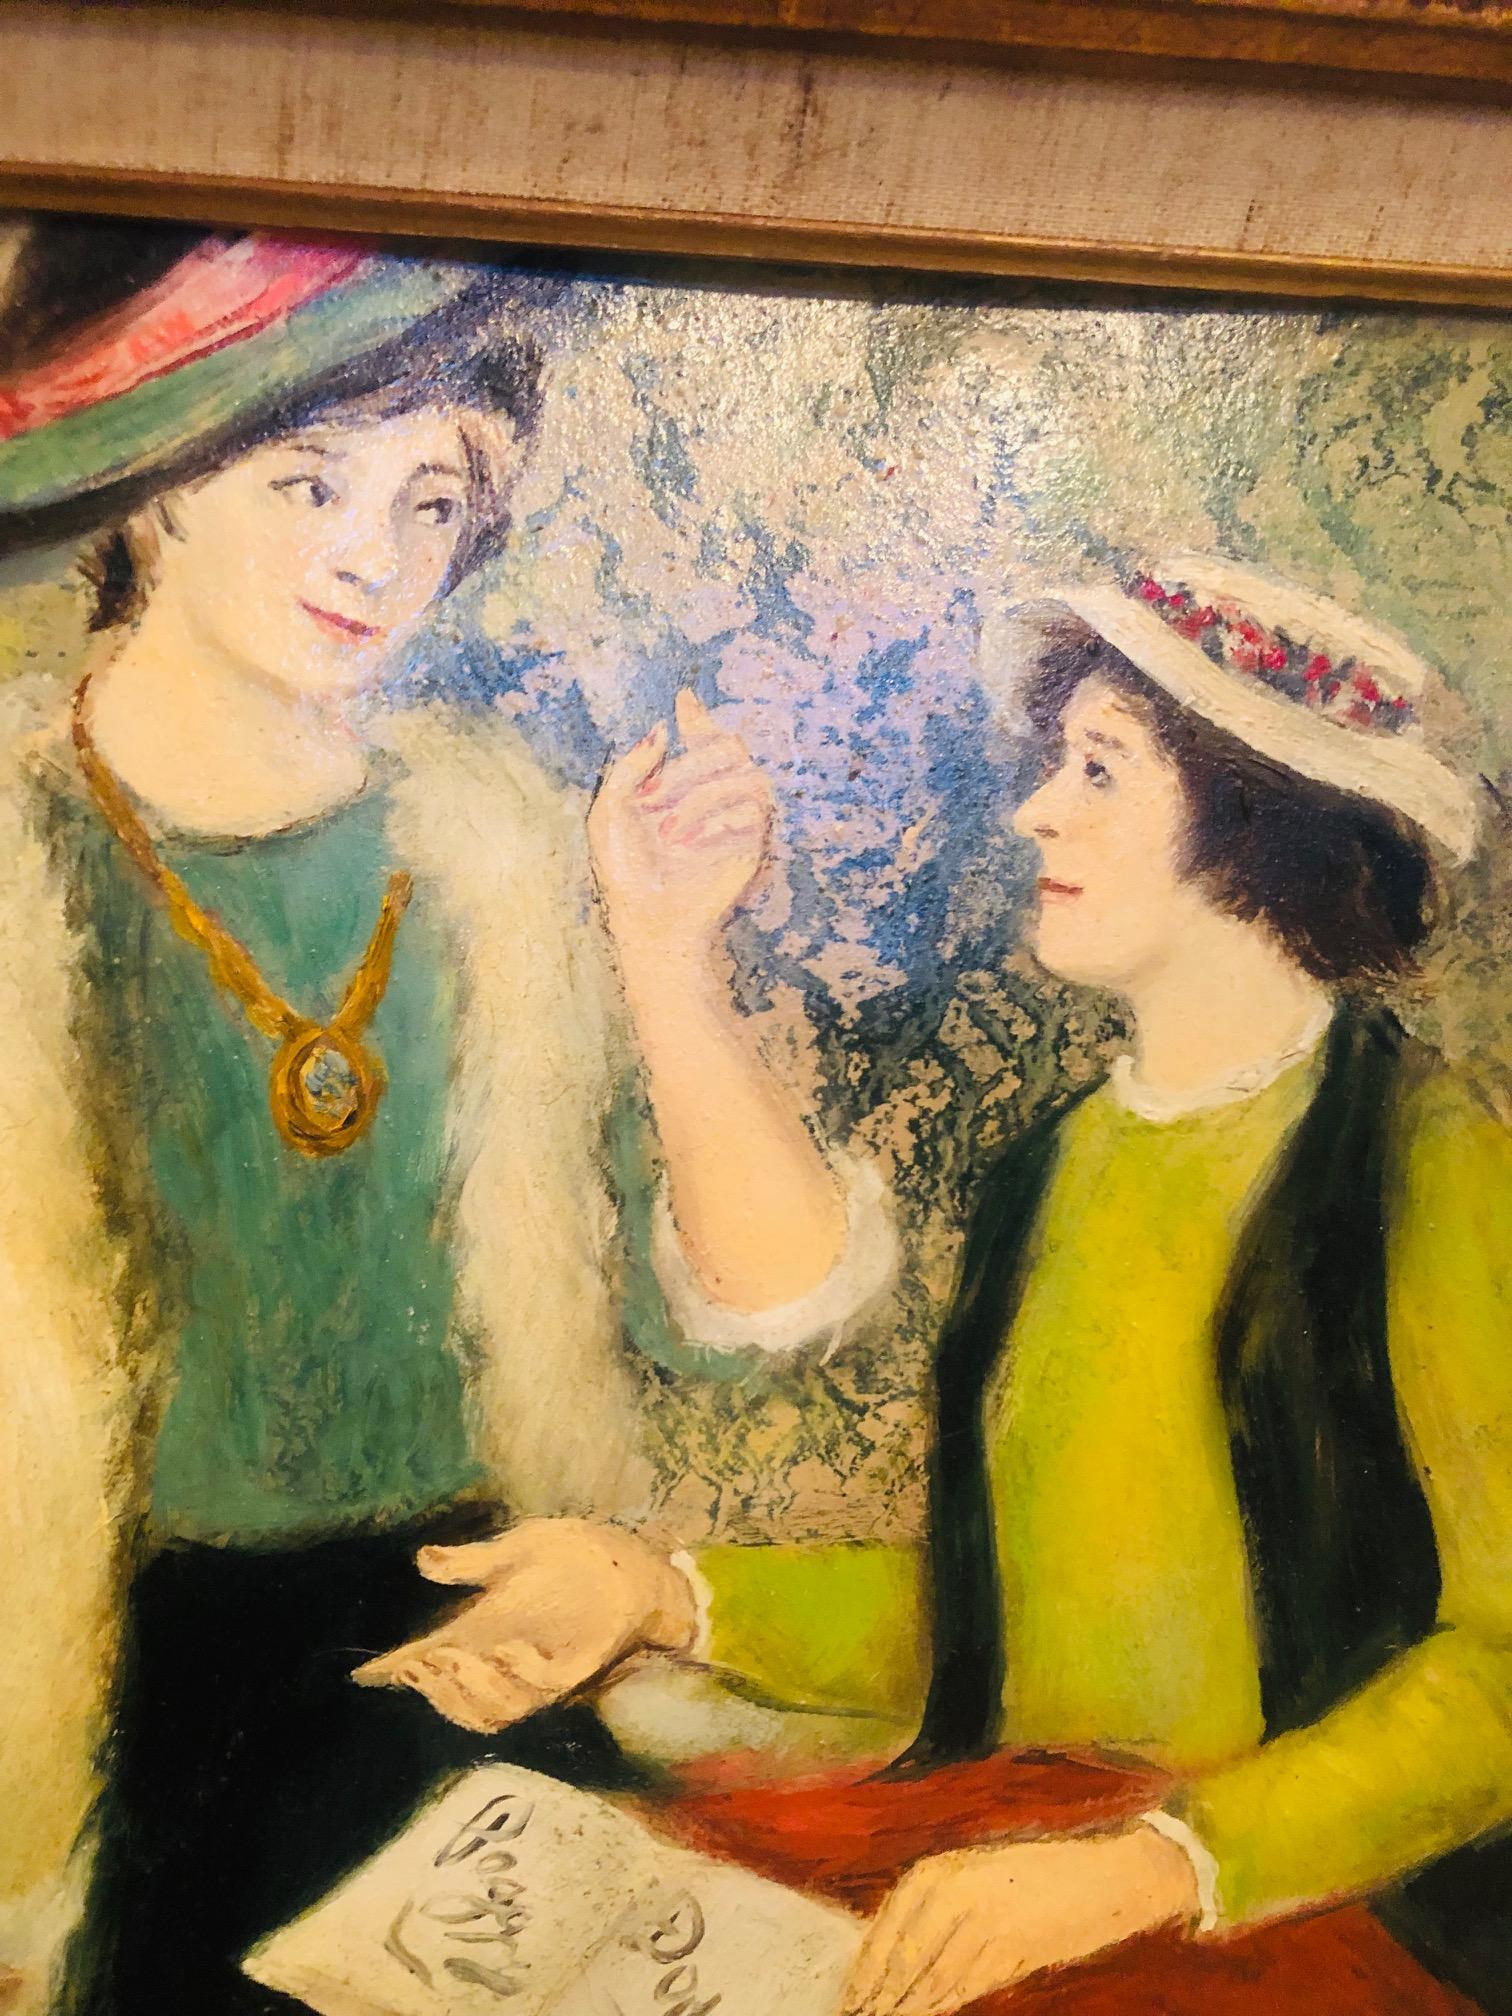 Great oil on board painting painted by Peggy Dodds of two fancy dressed women having a conversation. The artist signed her name in the book they are talking about on the table.